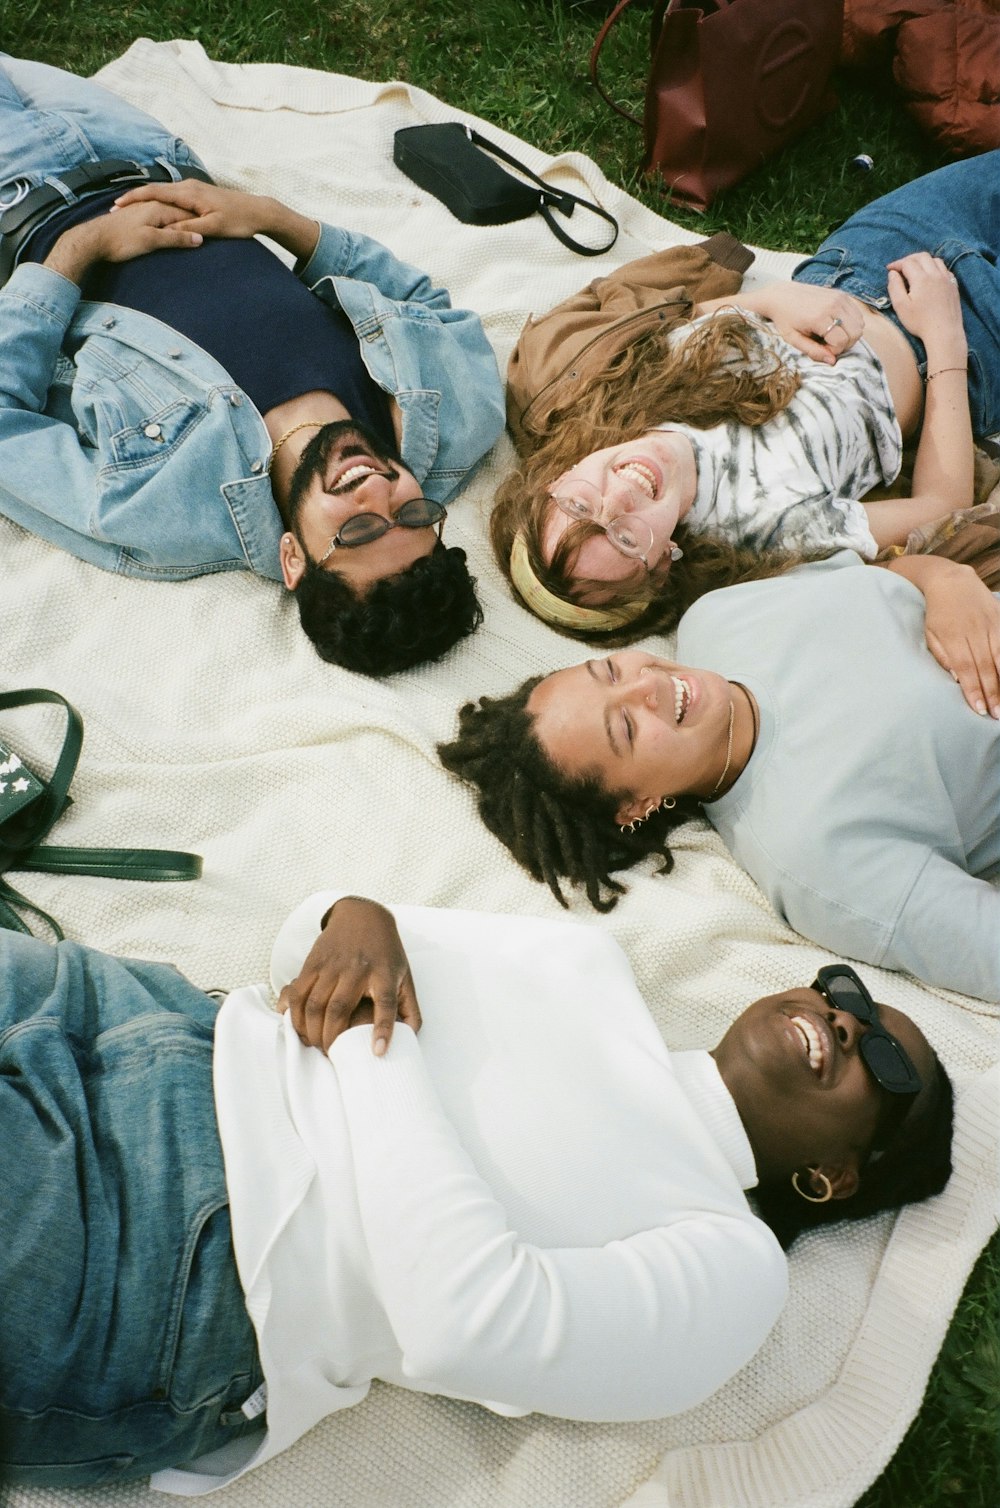 Group of people laughing while laying on grass